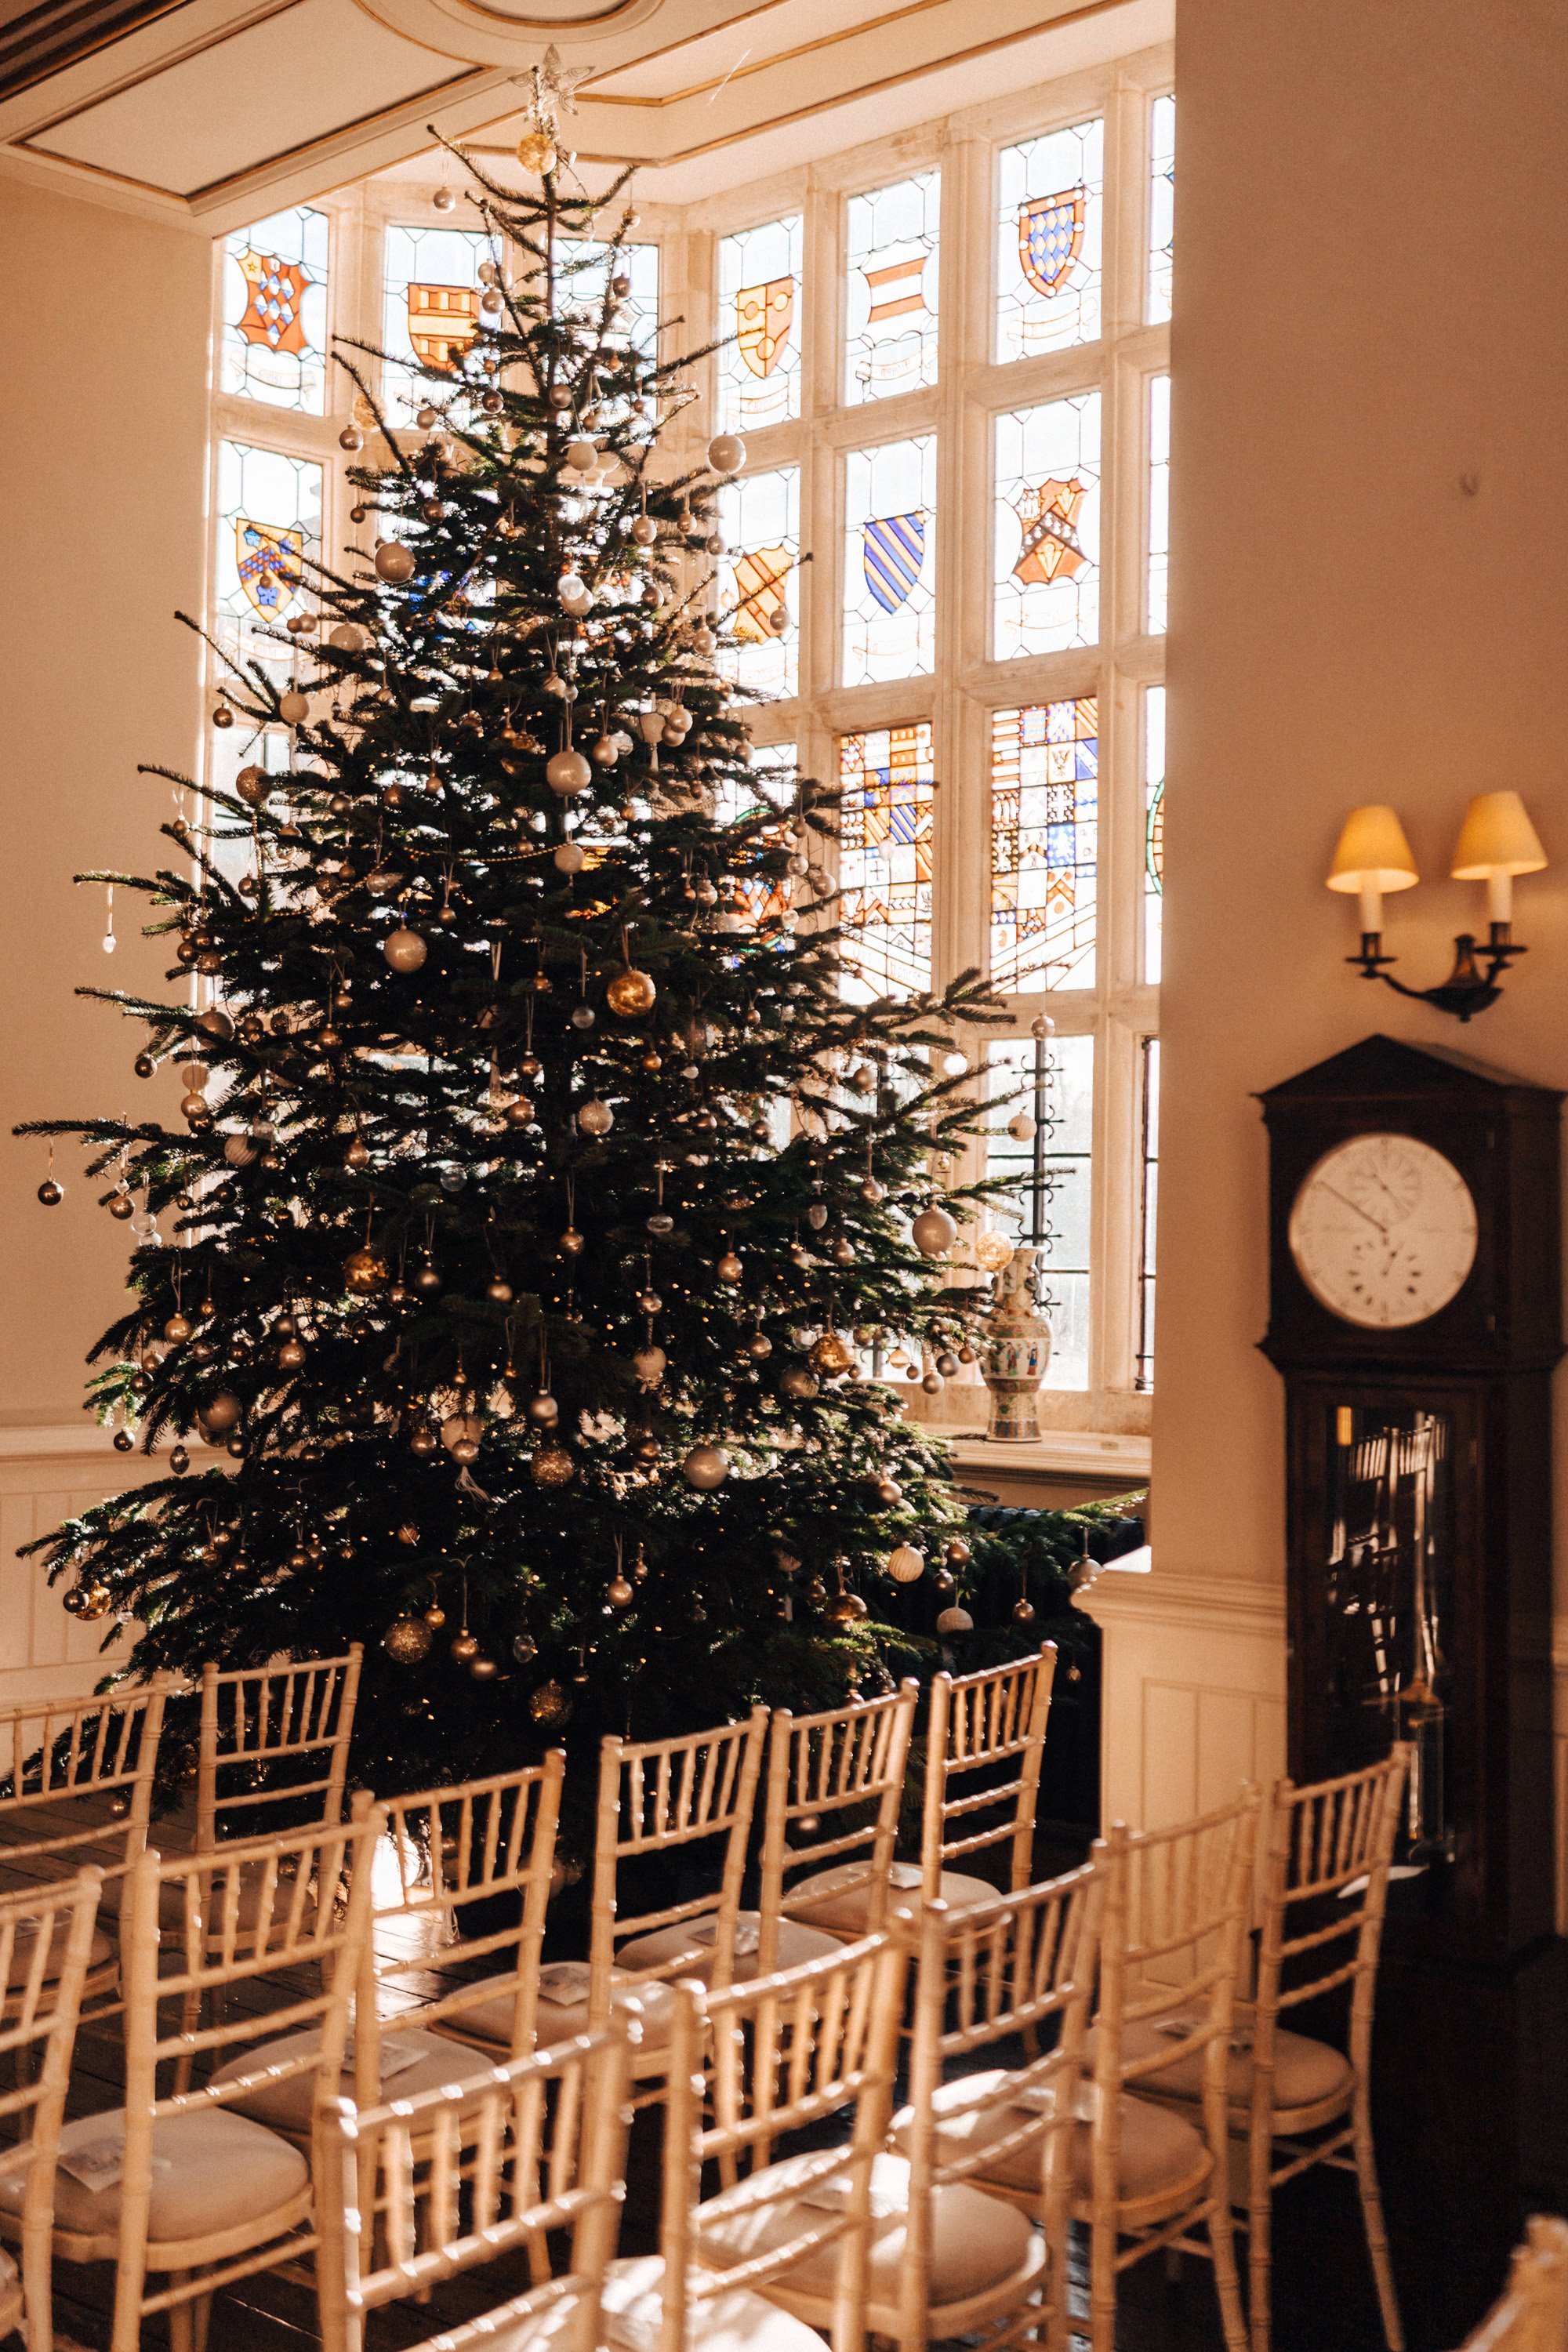 Huge Christmas tree in beautiful mullion window of winter wedding venue stately home in the UK